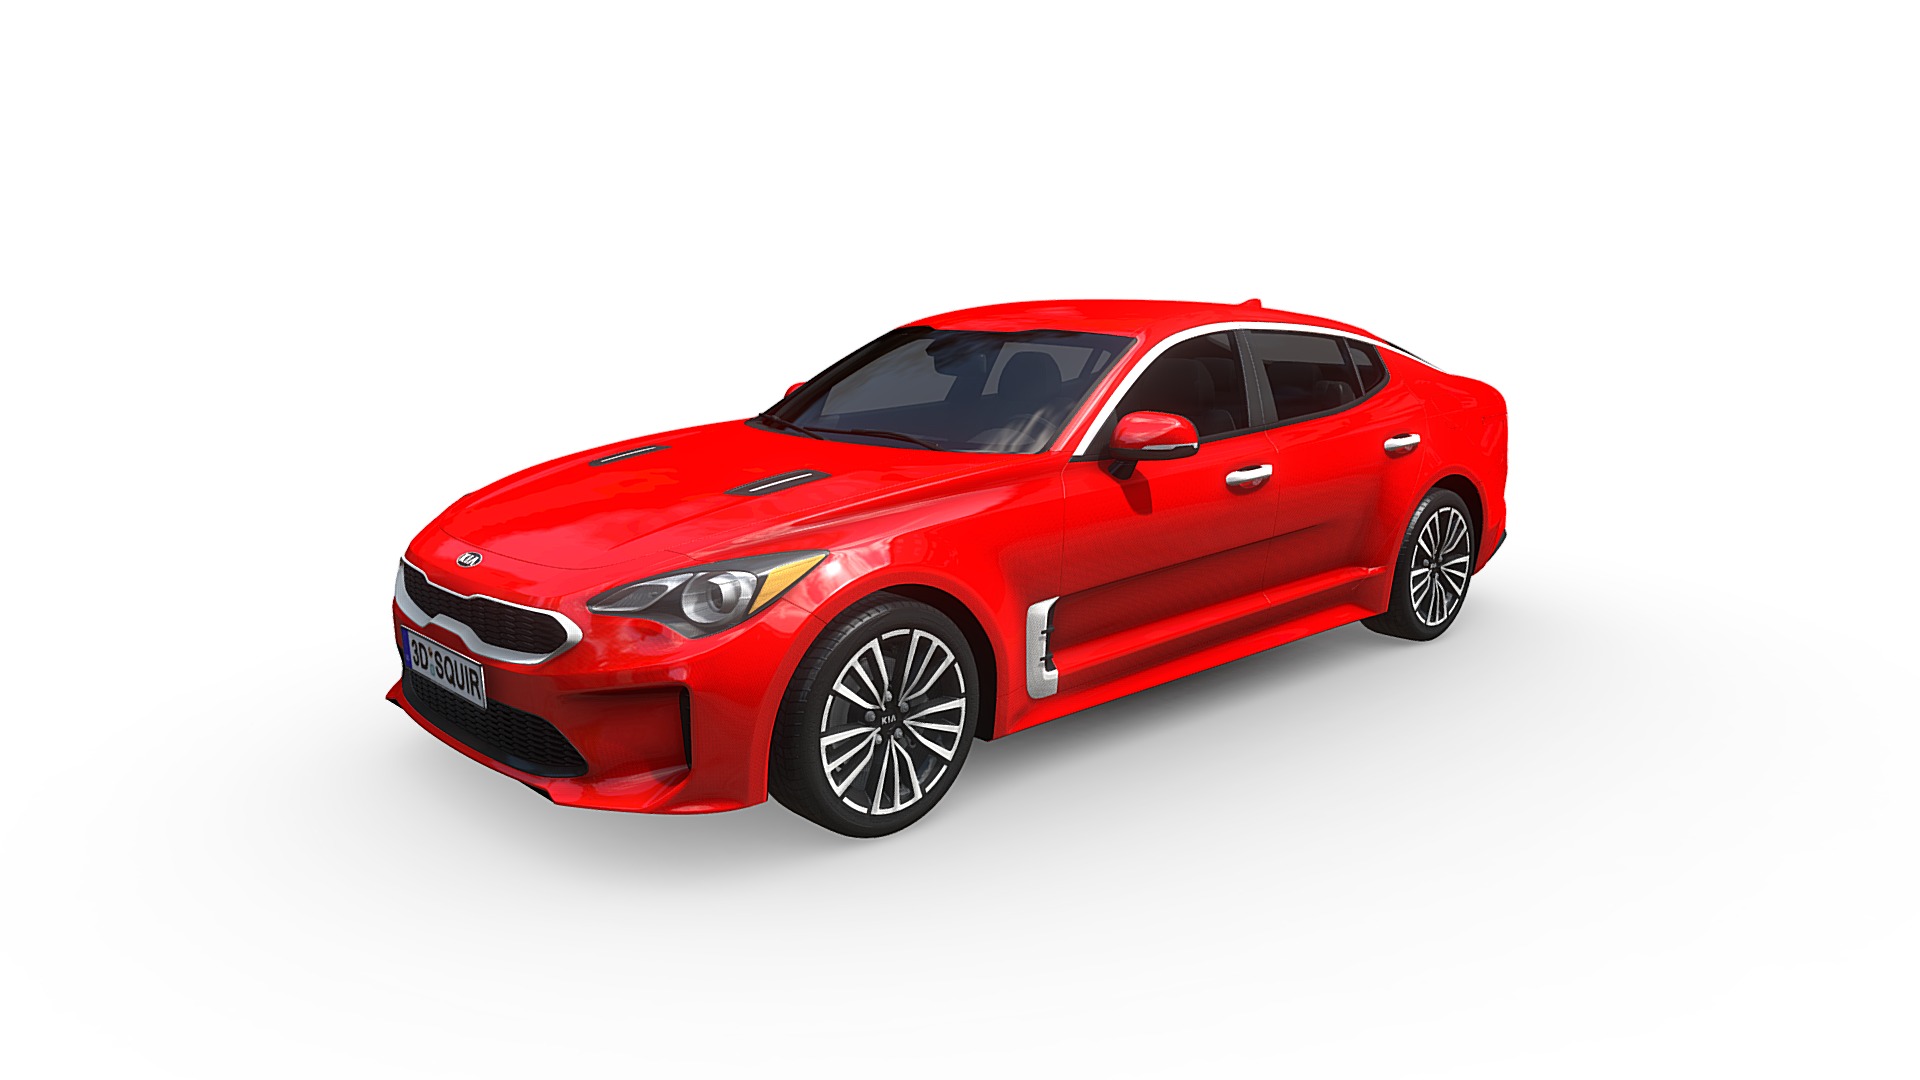 3D model Kia Stinger 2019 - This is a 3D model of the Kia Stinger 2019. The 3D model is about a red sports car.